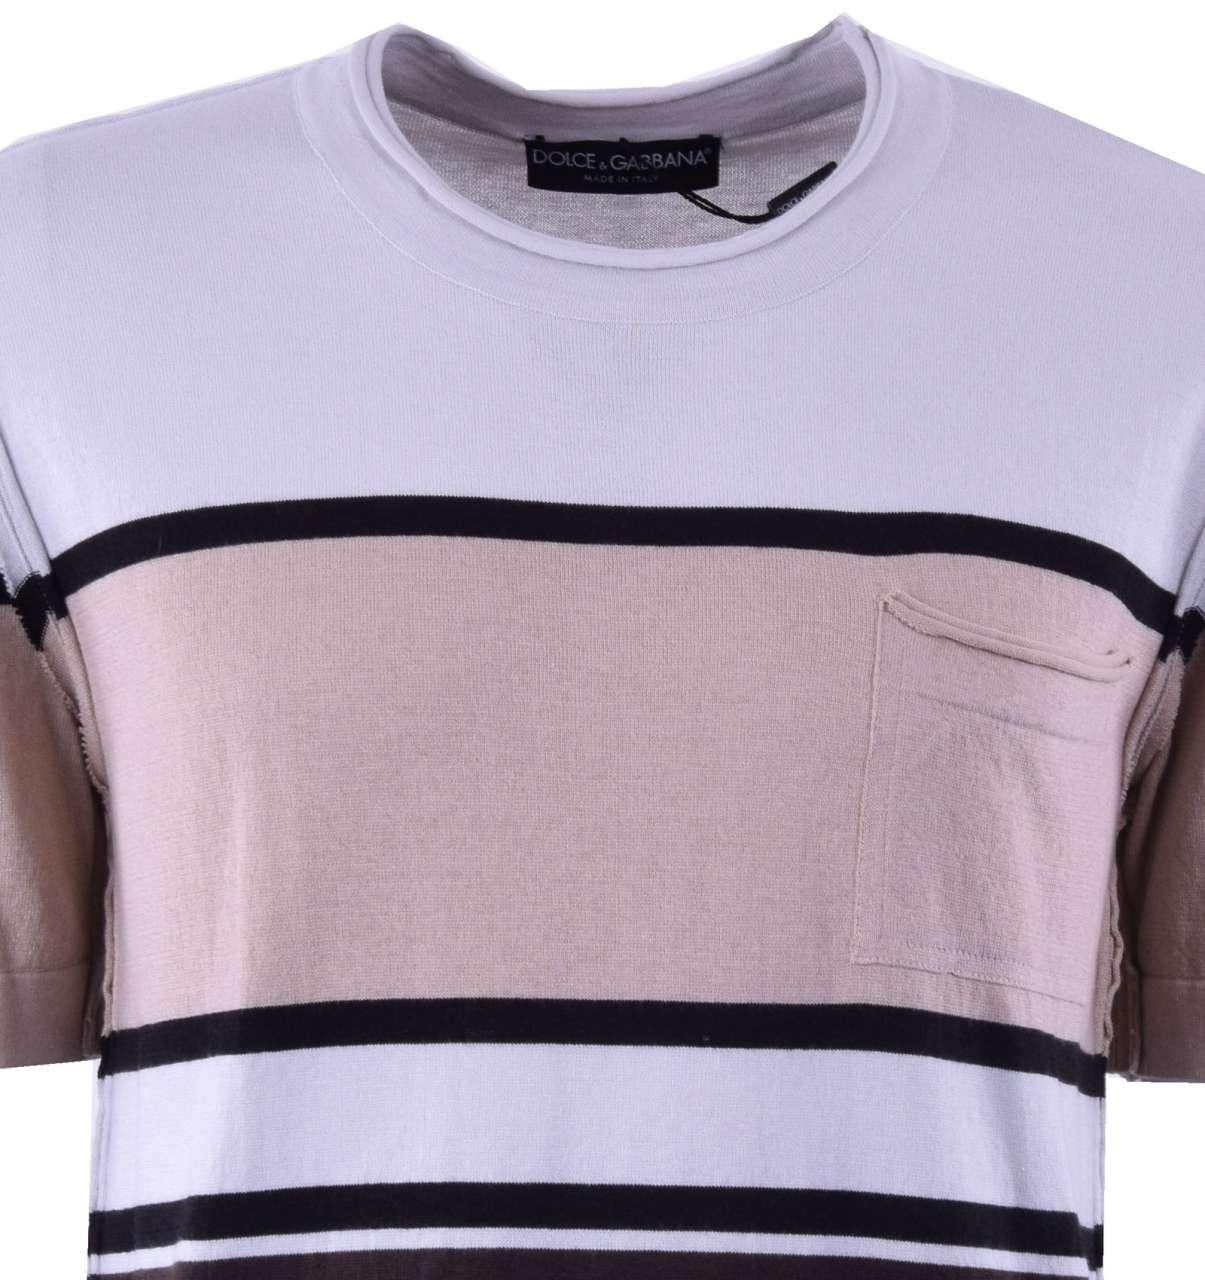 Dolce & Gabbana - Knitted Cotton Cashmere T-Shirt with Stripes Brown Beige 48 In Excellent Condition For Sale In Erkrath, DE